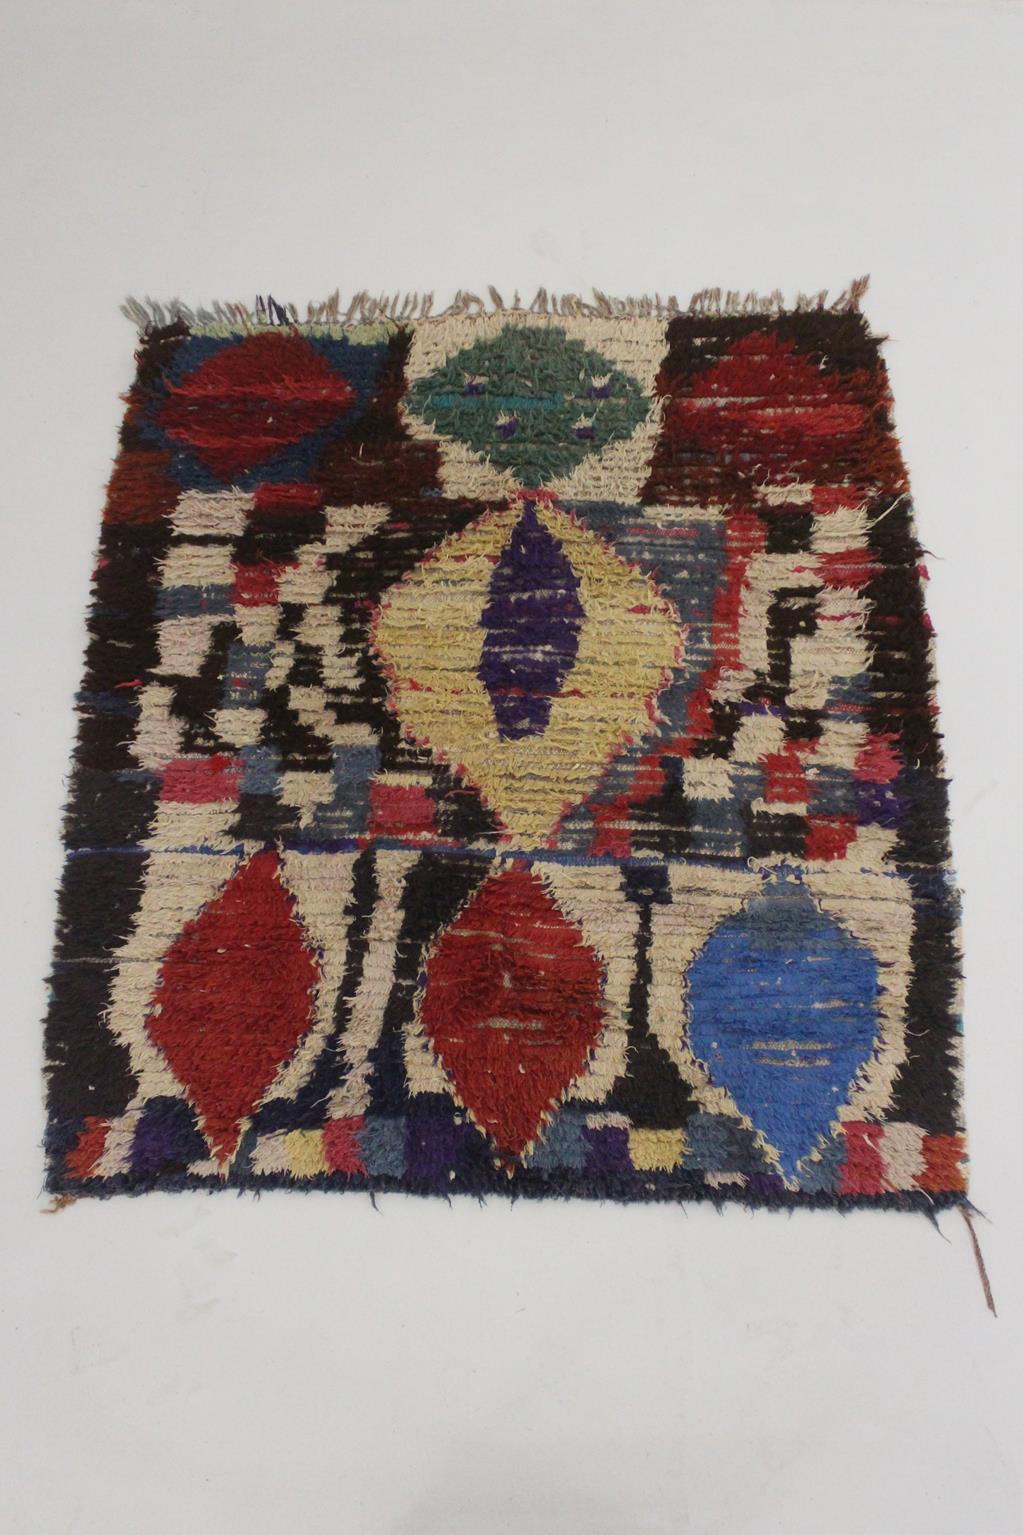 I picked this lovely rug from piles of carpets as I think it is such an original vintage piece! Main colors are brown, red, beige, blue, green, yellow, purple. I really love the composition with the large, rounded diamonds and especially the serie